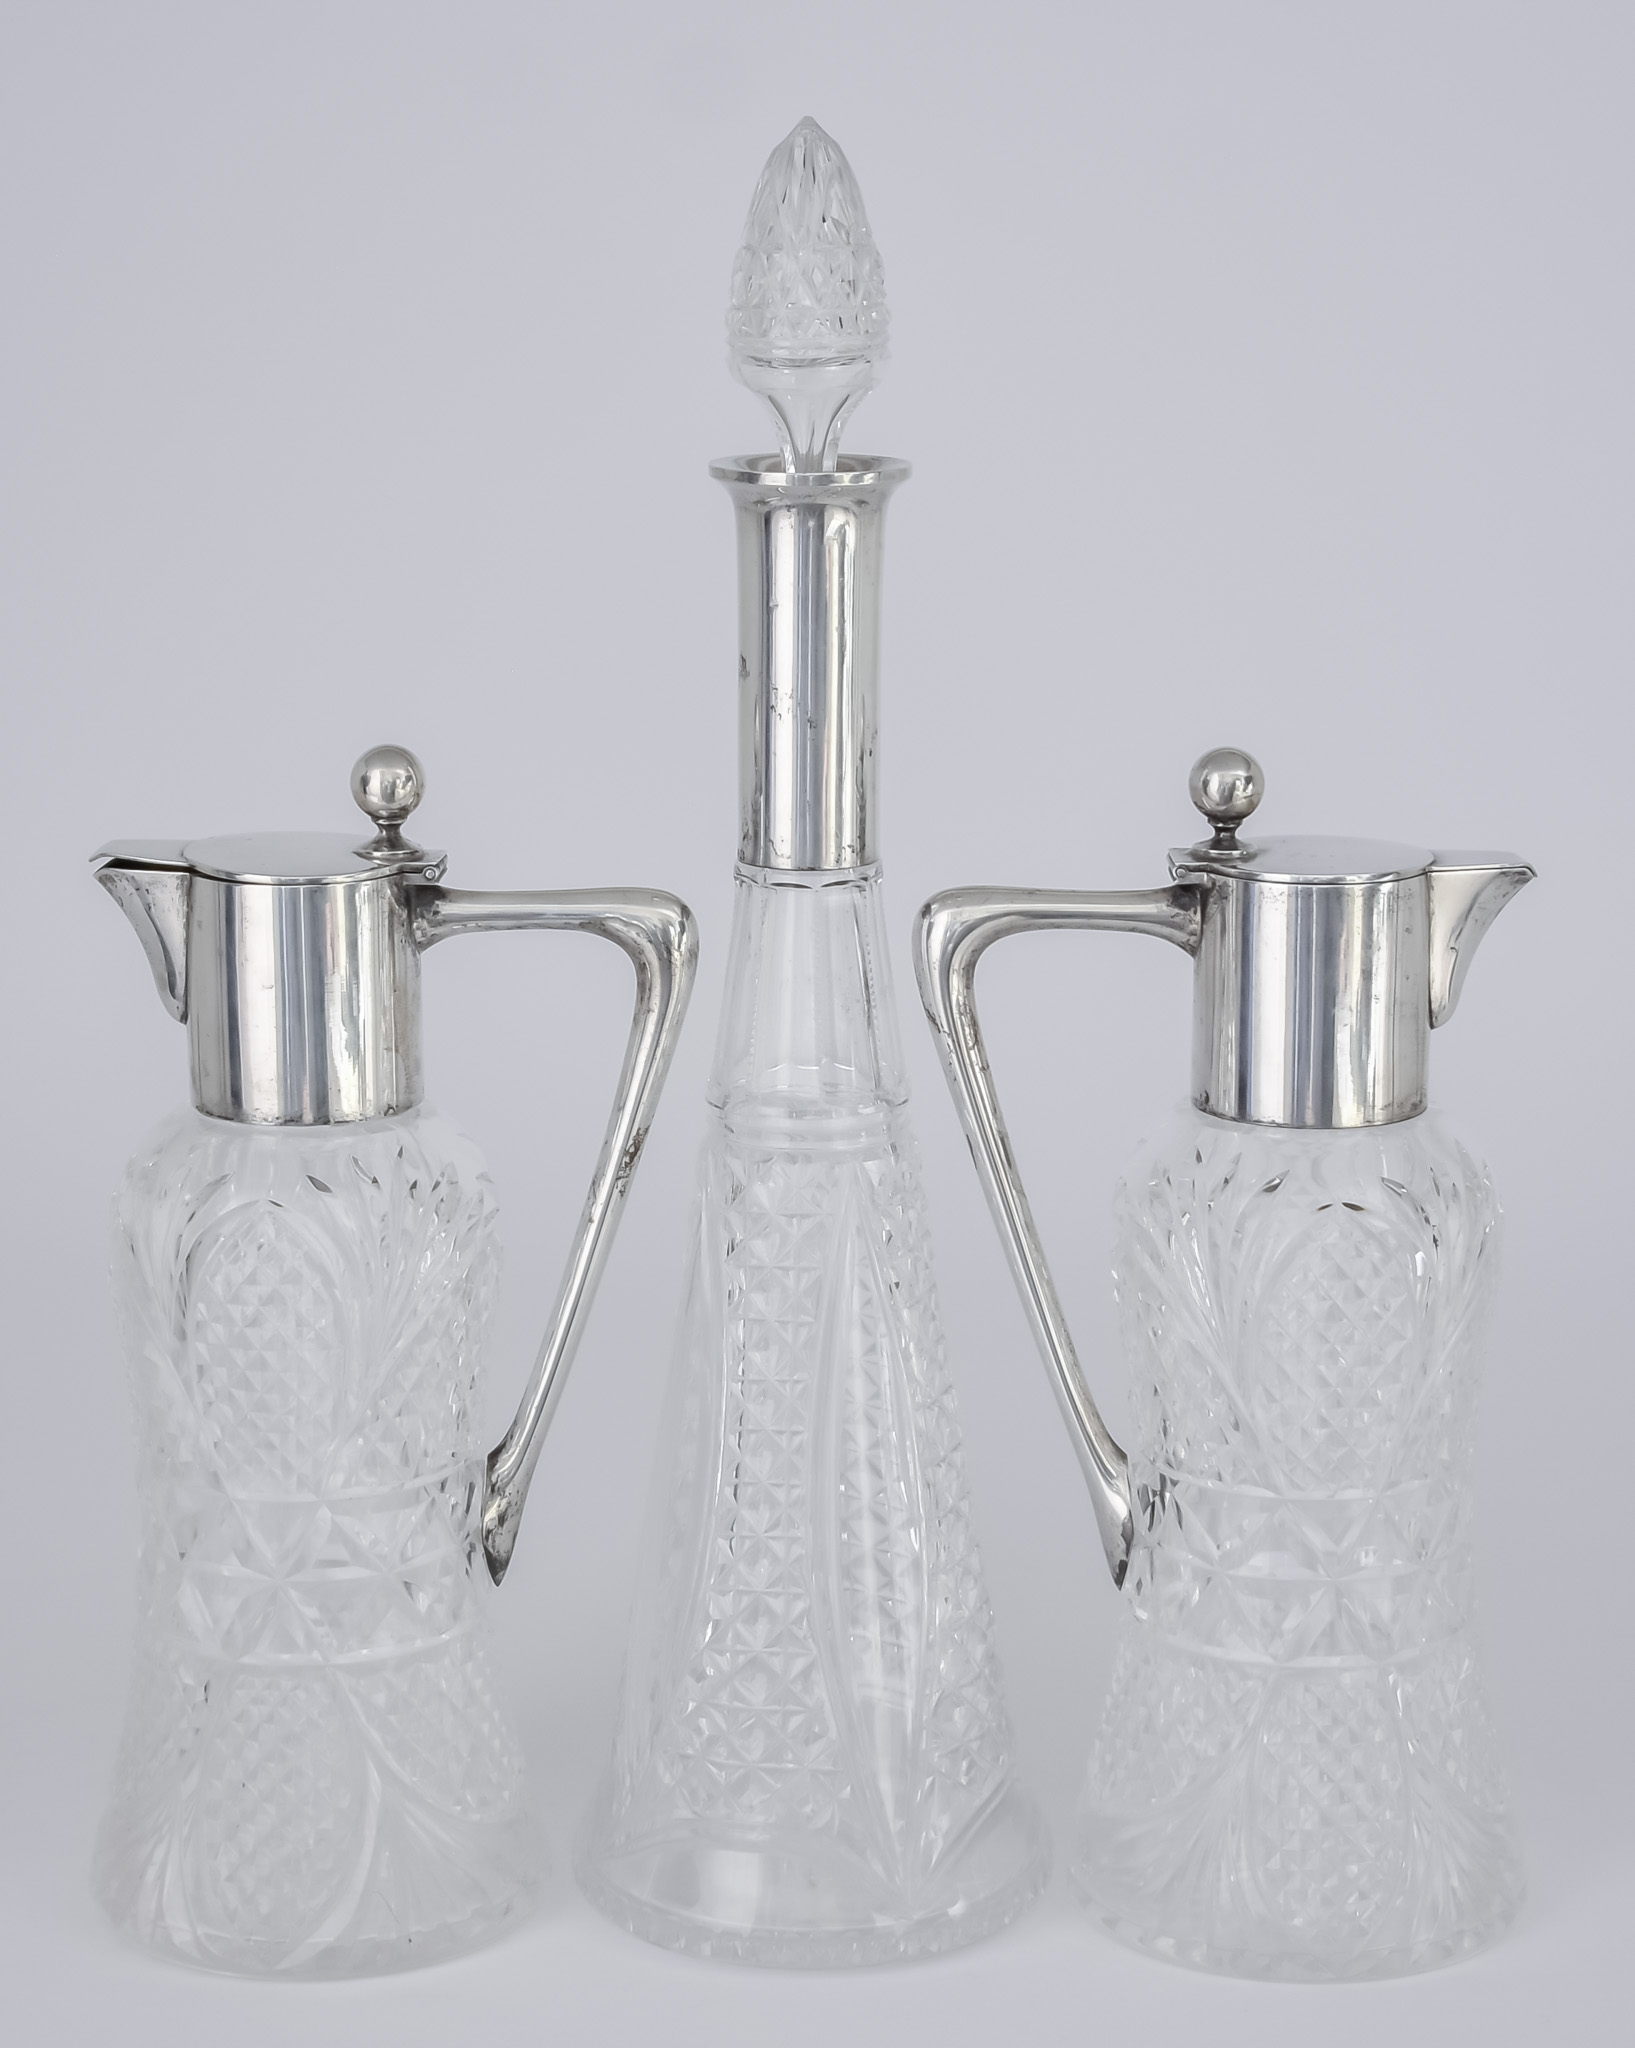 A Pair of German Silver Mounted and Cut Glass Claret Jugs and a Similar Decanter, the claret jugs